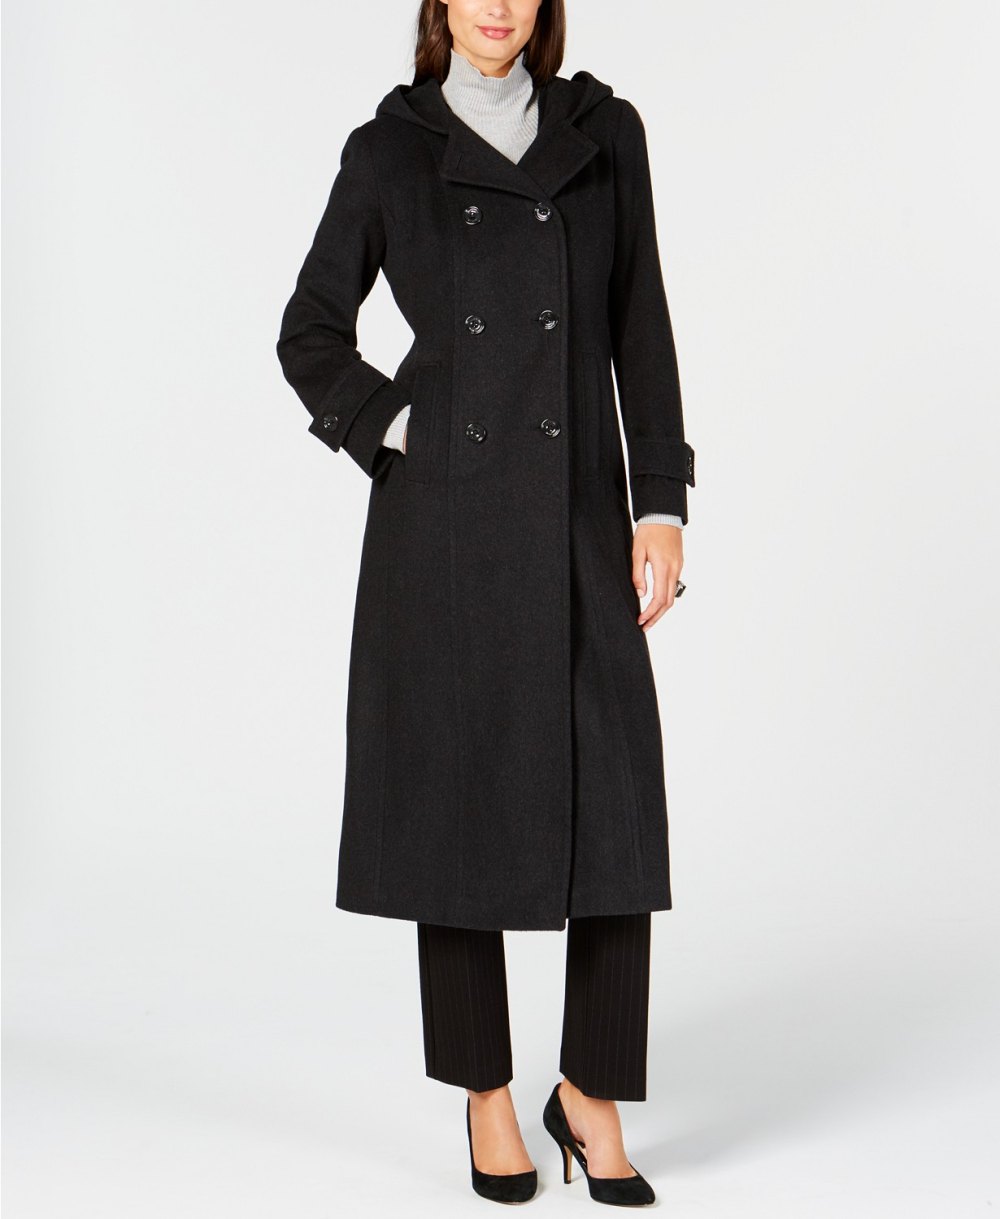 Anne Klein Double-Breasted Hooded Coat (Charcoal)